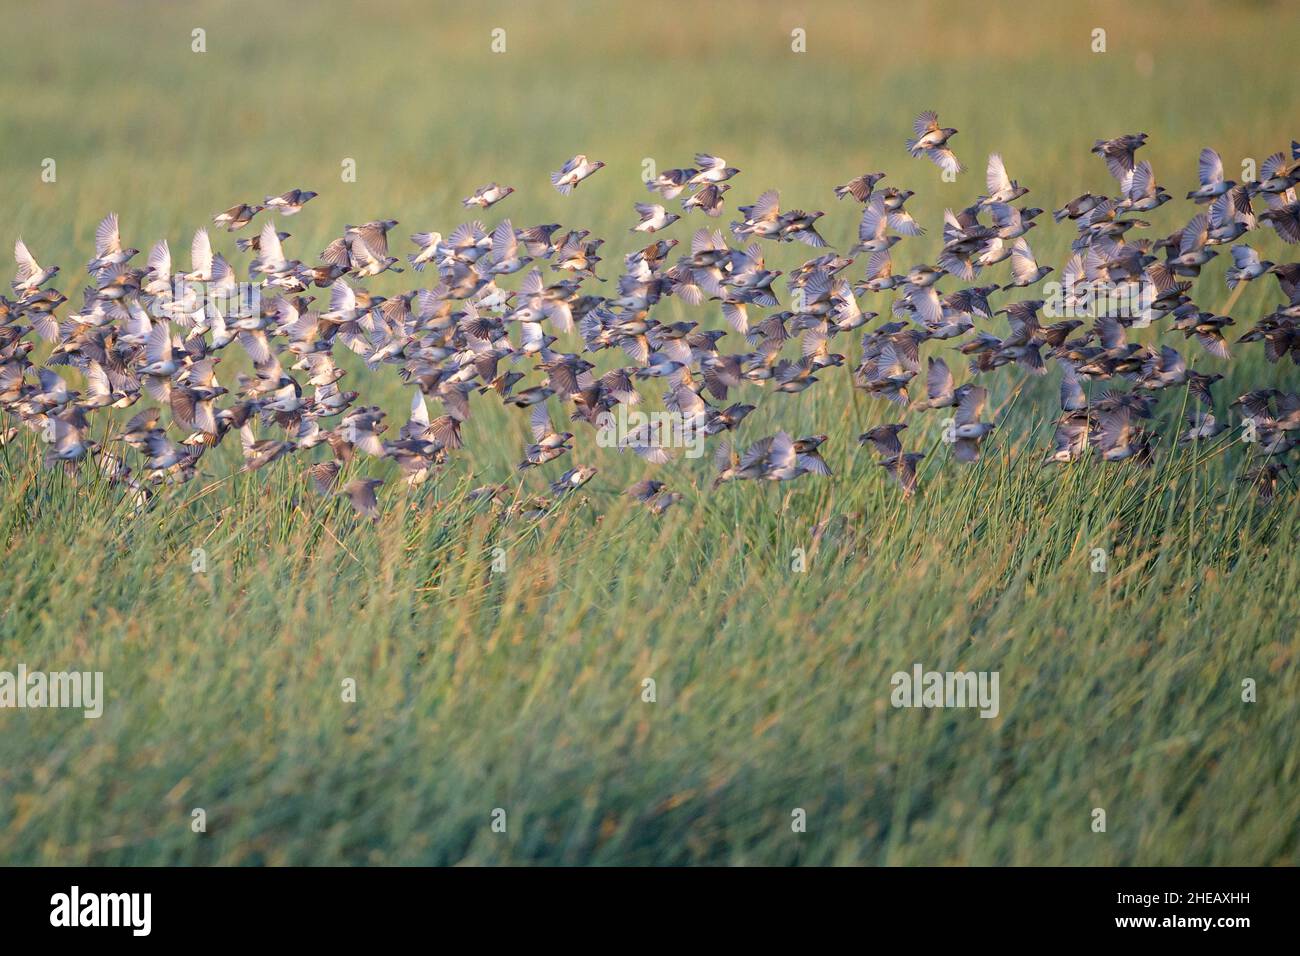 Flock of red-billed queleas (Quelea quelea) in murmuration over the marsh at sunrise, Ndutu, Ngorongoro conservation area, Tanzania, Africa. Stock Photo